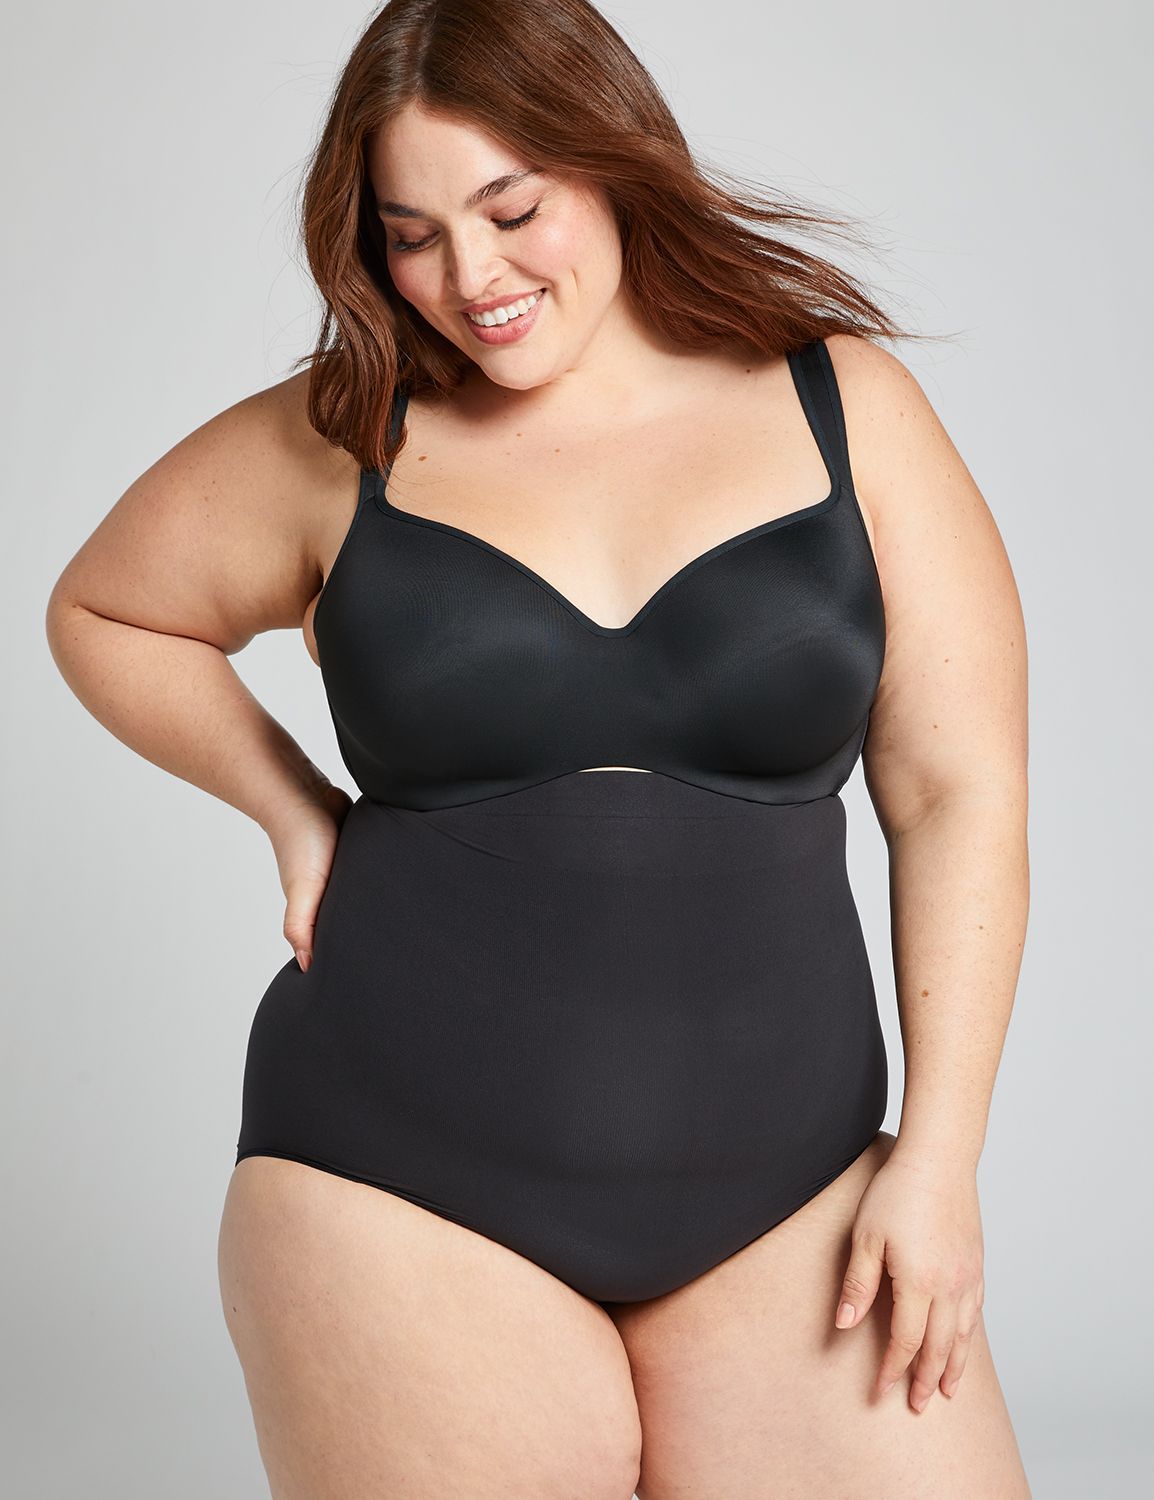 Holyoke Mall at Ingleside - Lane Bryant Huge Flash Sale!! 40% off Apparel,  Accessories and Sleep ( All Day ) Excludes Bras, Panties, SPANX and  Clearance!